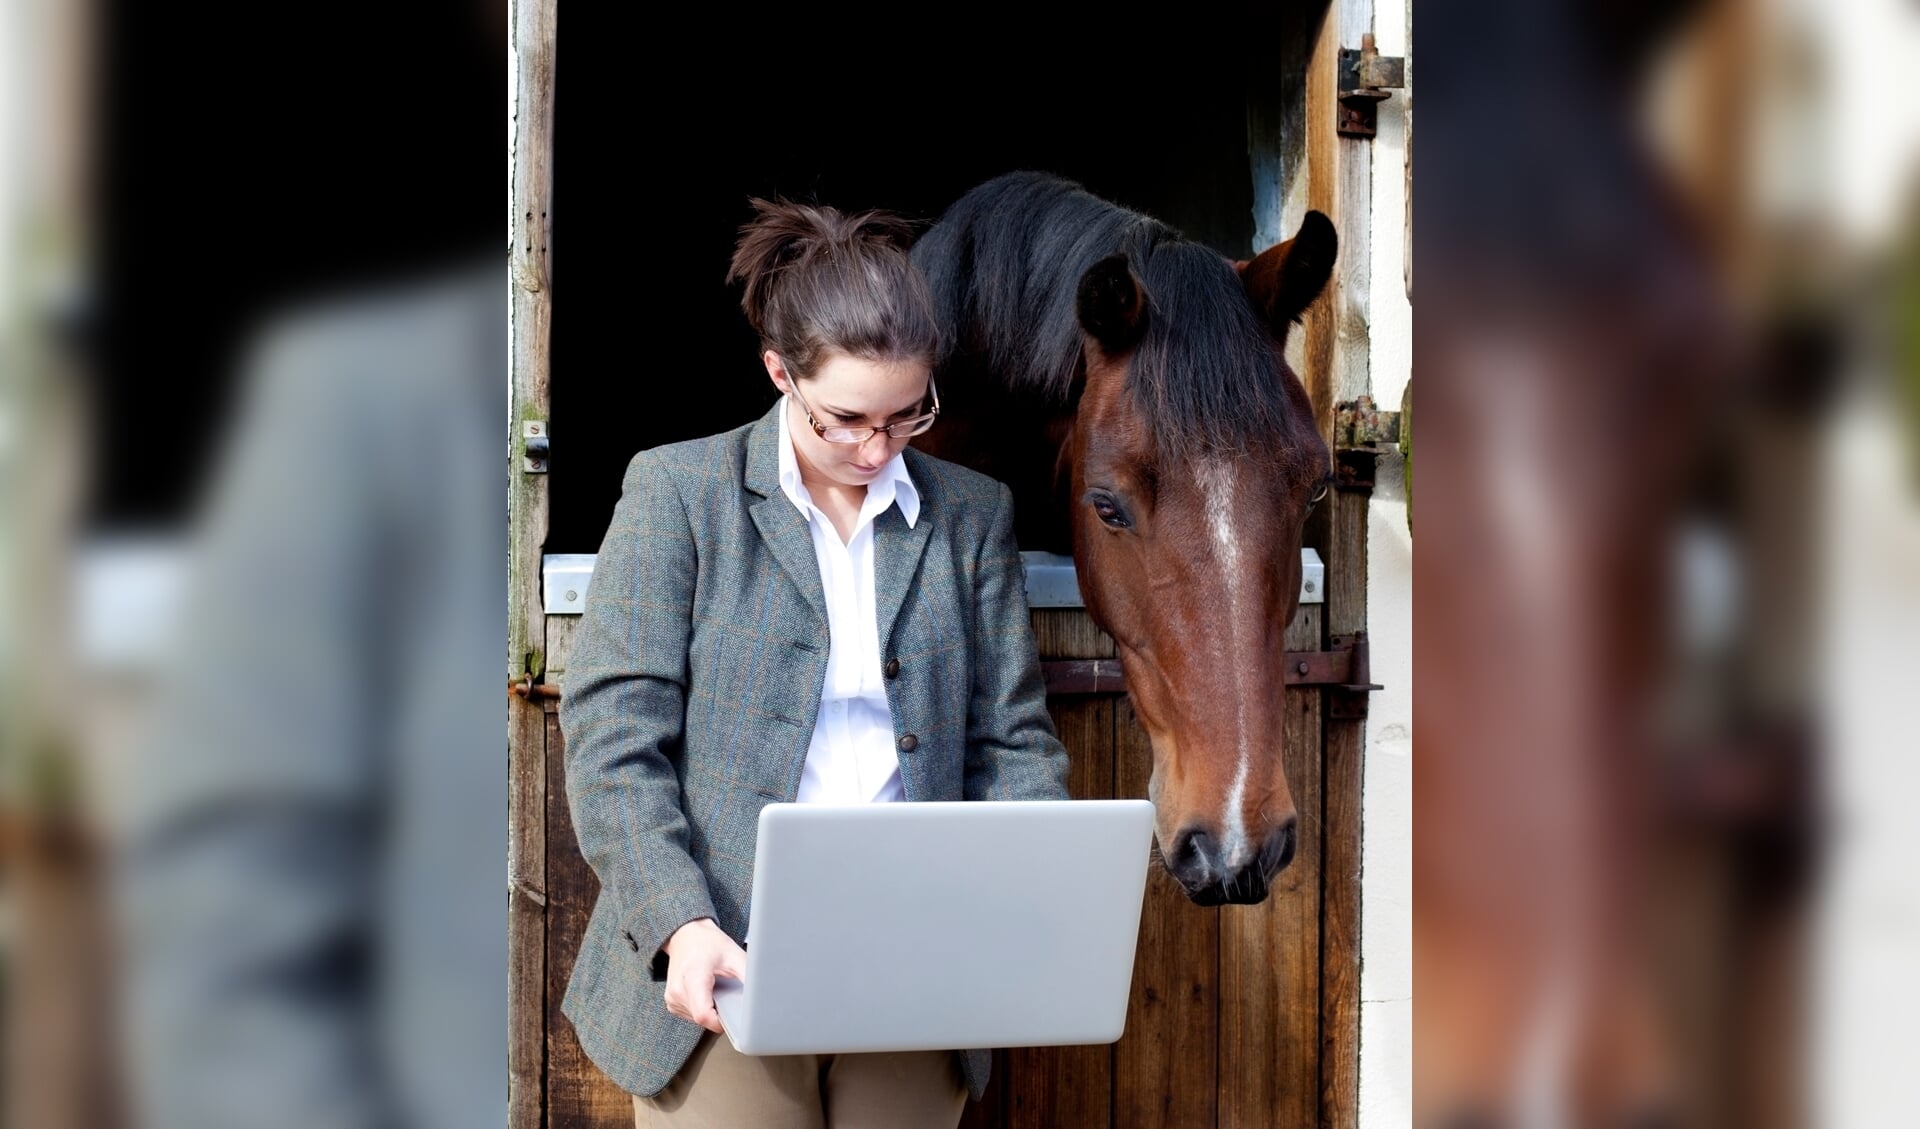 young woman with computer and horse, contemplating equestrian business